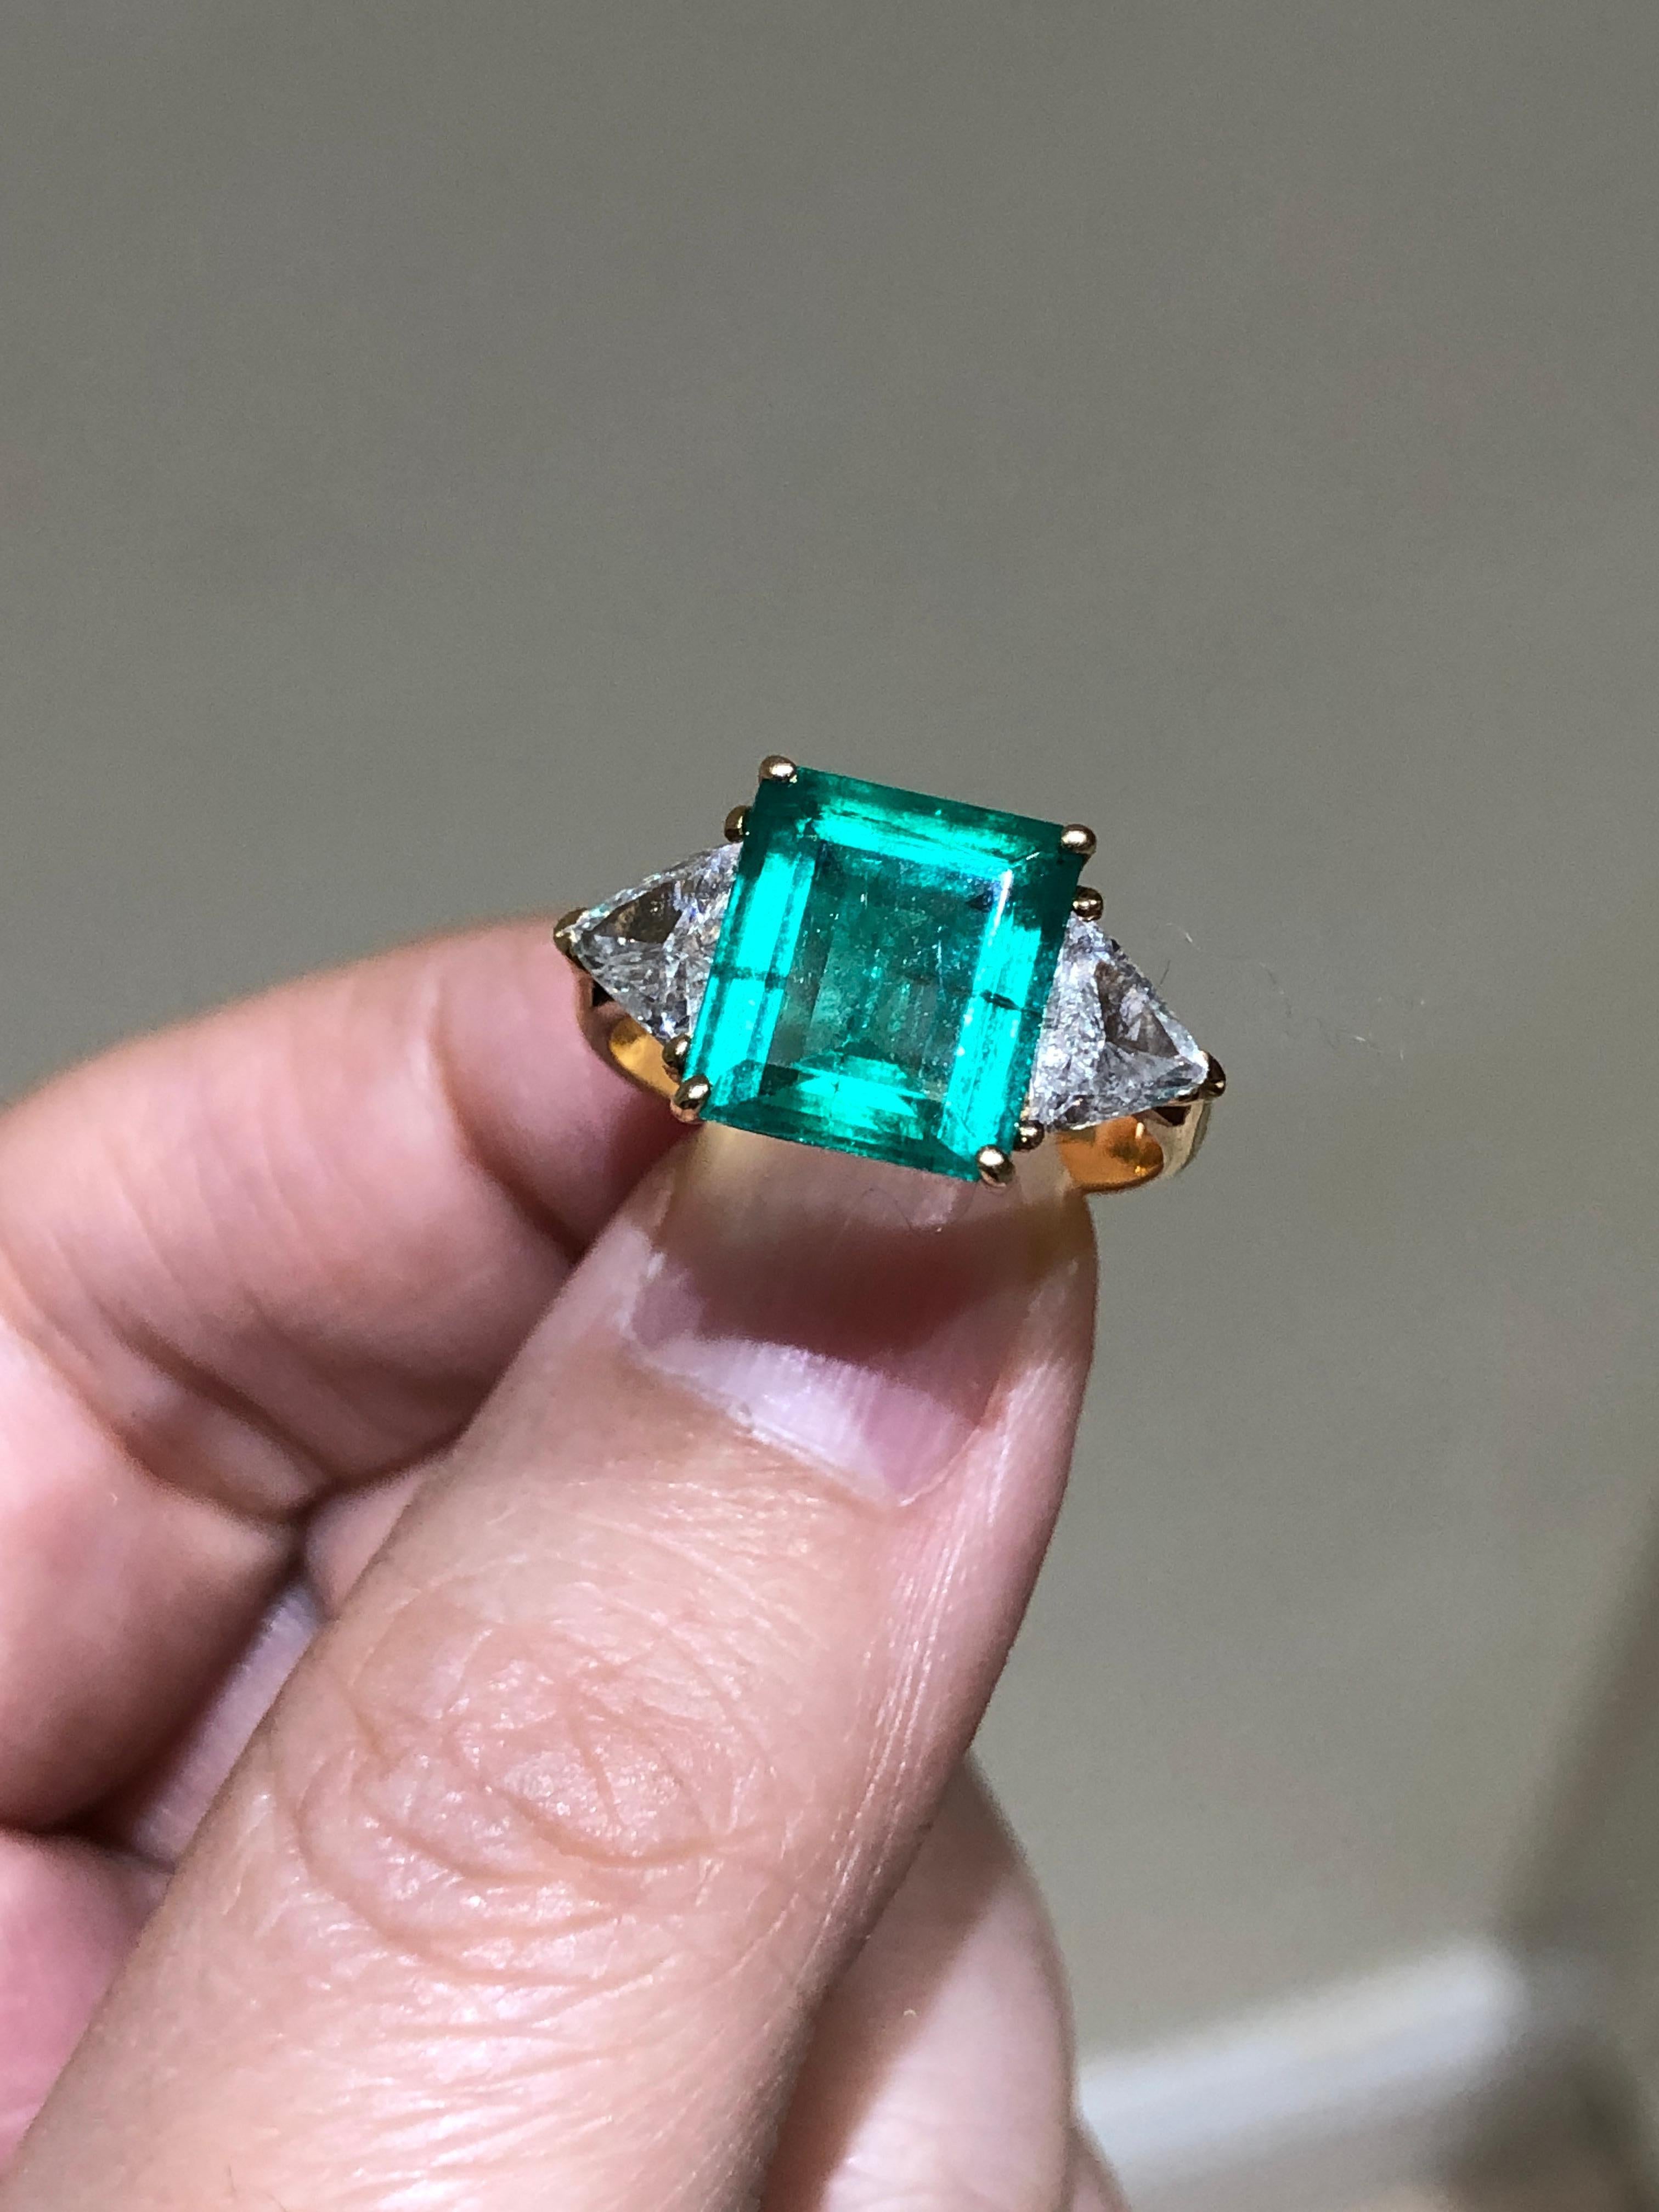 Metal	                                18K Yellow Gold
Weight                                  	Approx 4.8g
Diamonds                               Total approx 1.2 carats /  G-I ,VS-SI
Emerald                                  Approx 3ct /Columbia